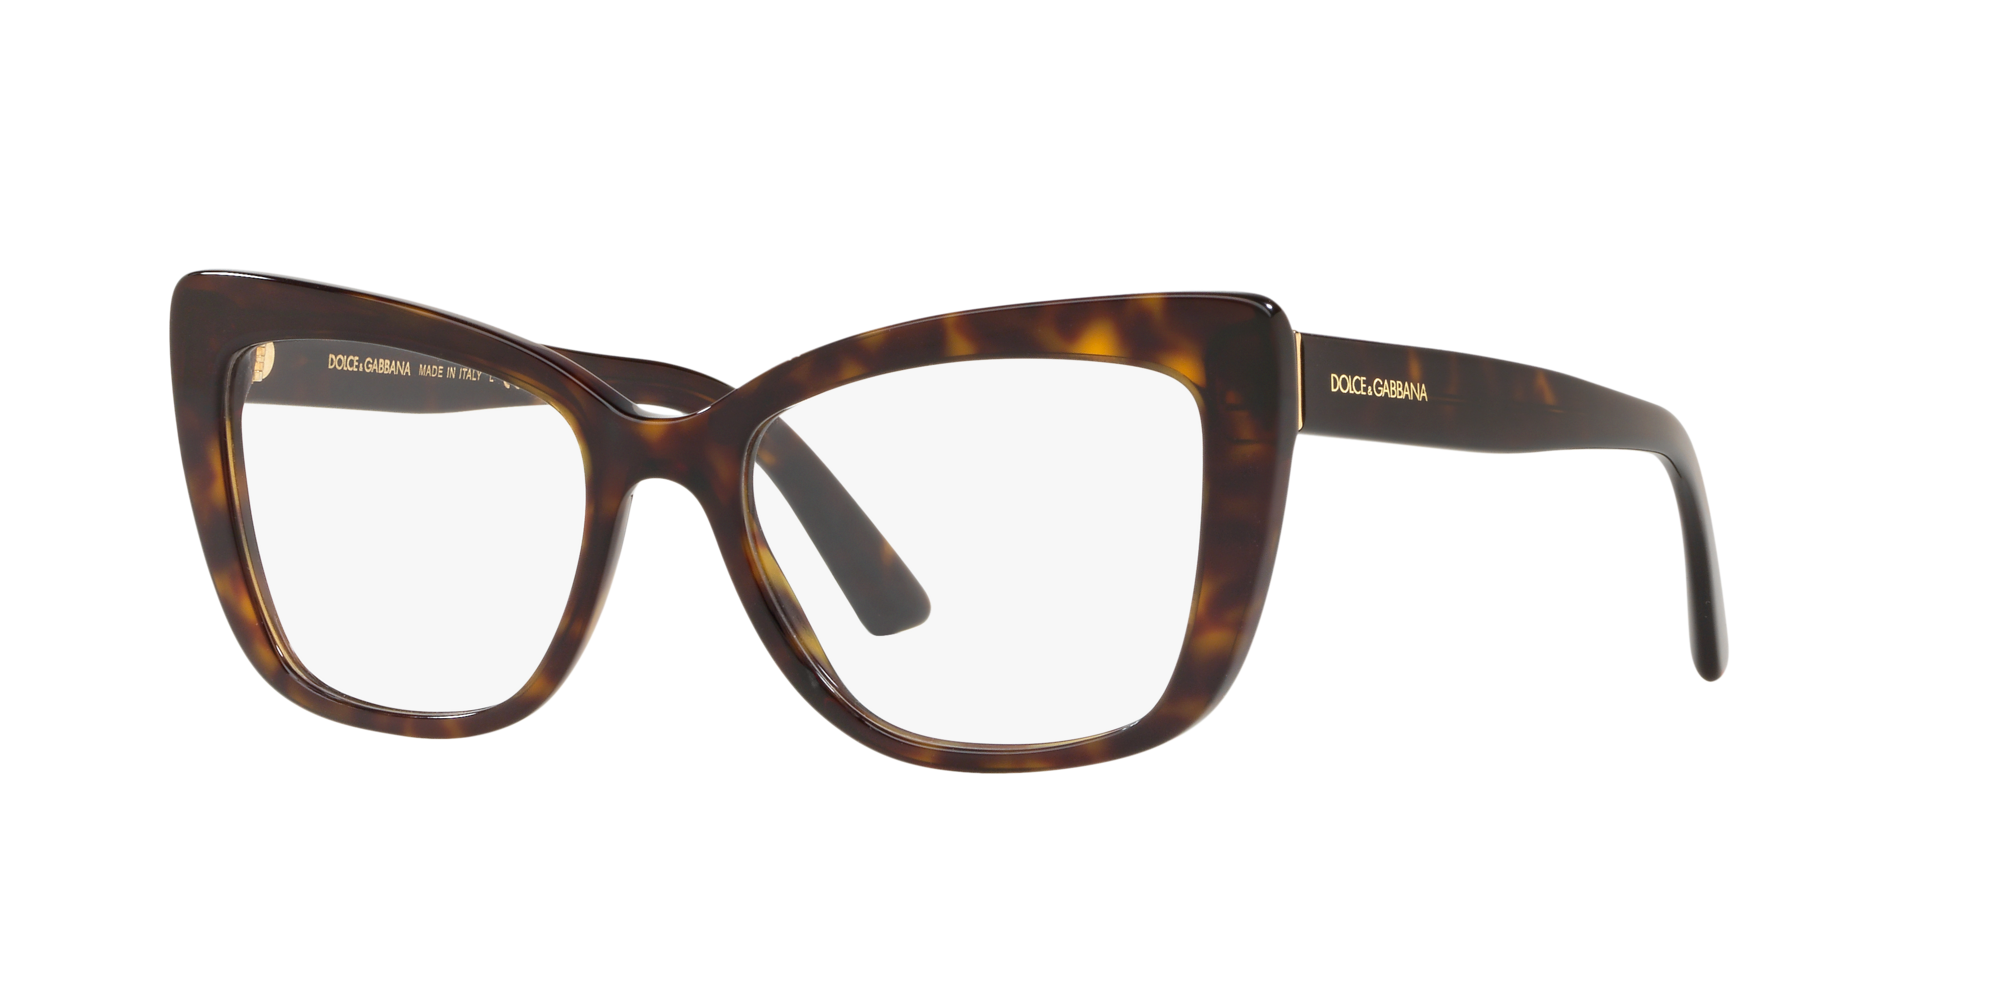 dolce and gabbana glasses lenscrafters